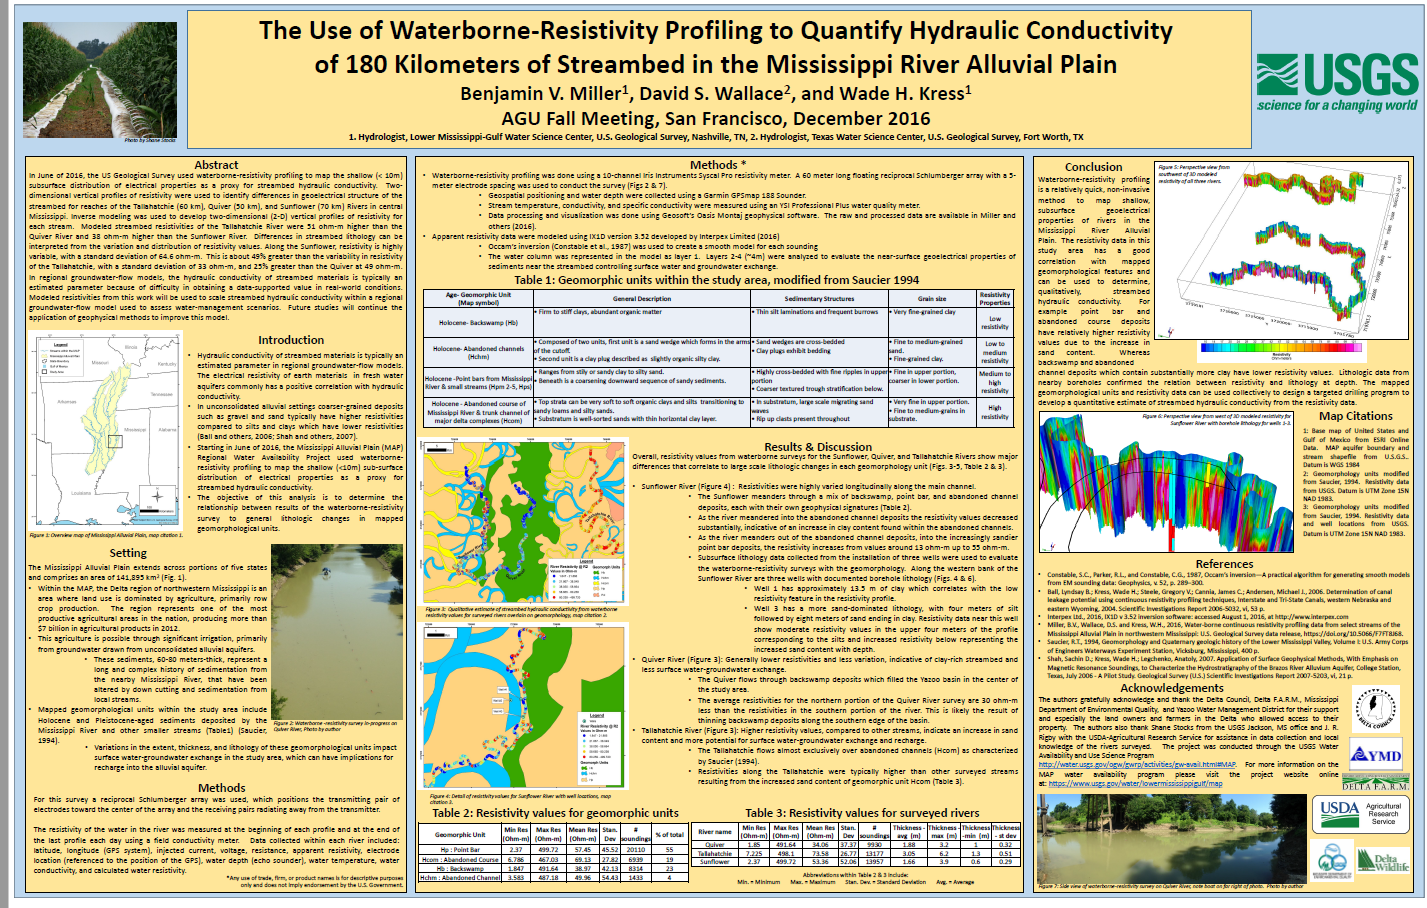 The Use of Waterborne-Resistivity Profiling to Quantify Hydraulic Conductivity of 180 Kilometers of Streambed in the Mississippi River Alluvial Plain